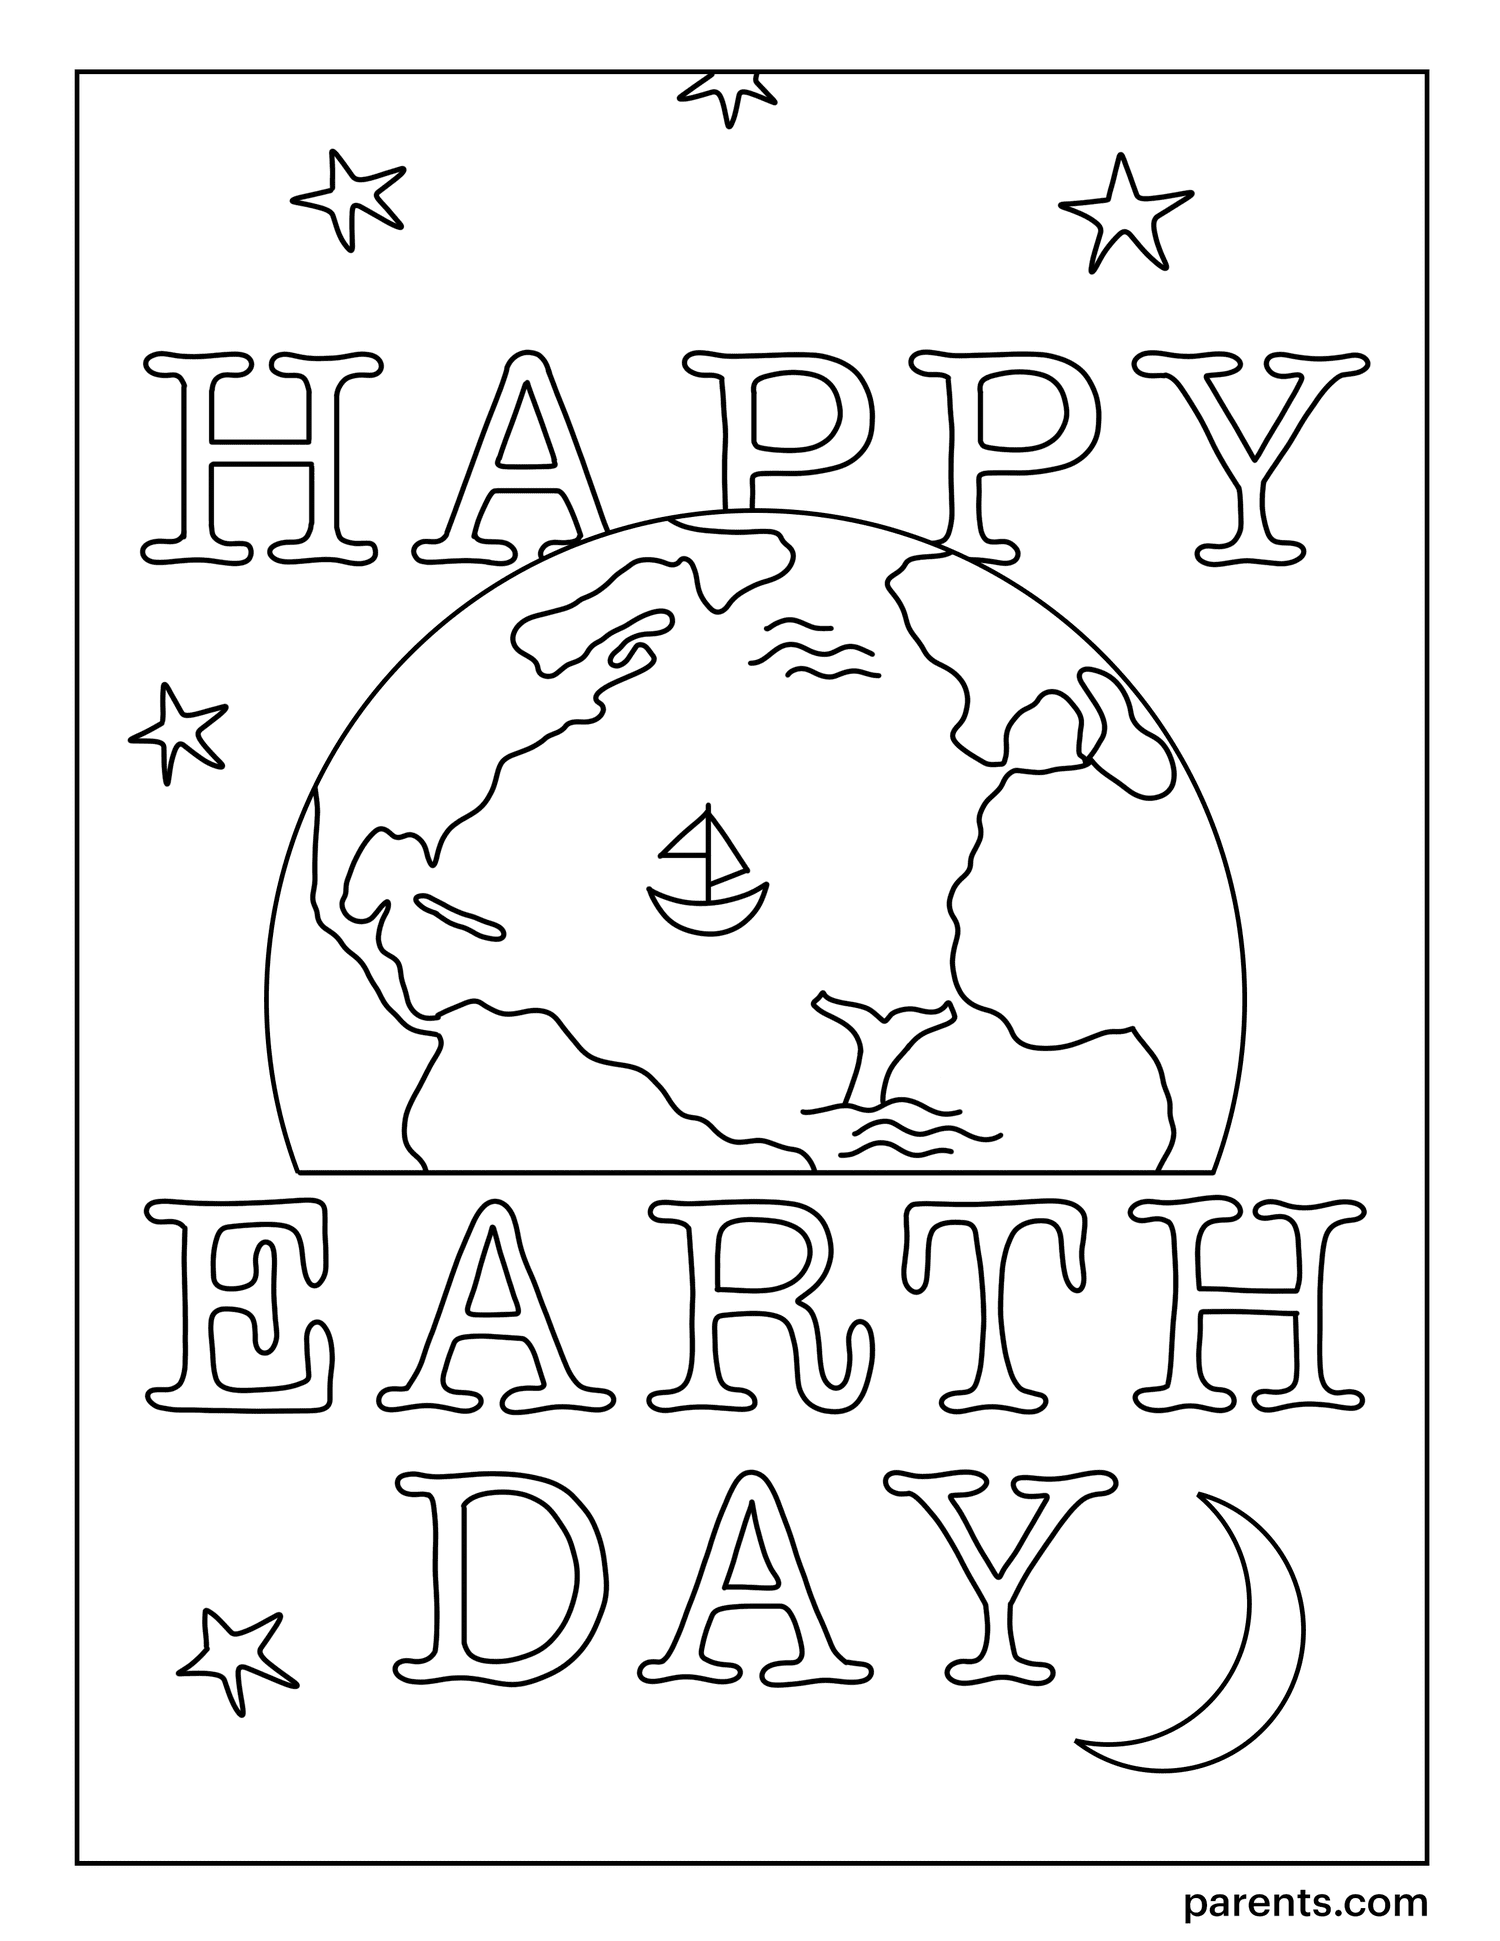 10 Free Earth Day Coloring Pages for Kids